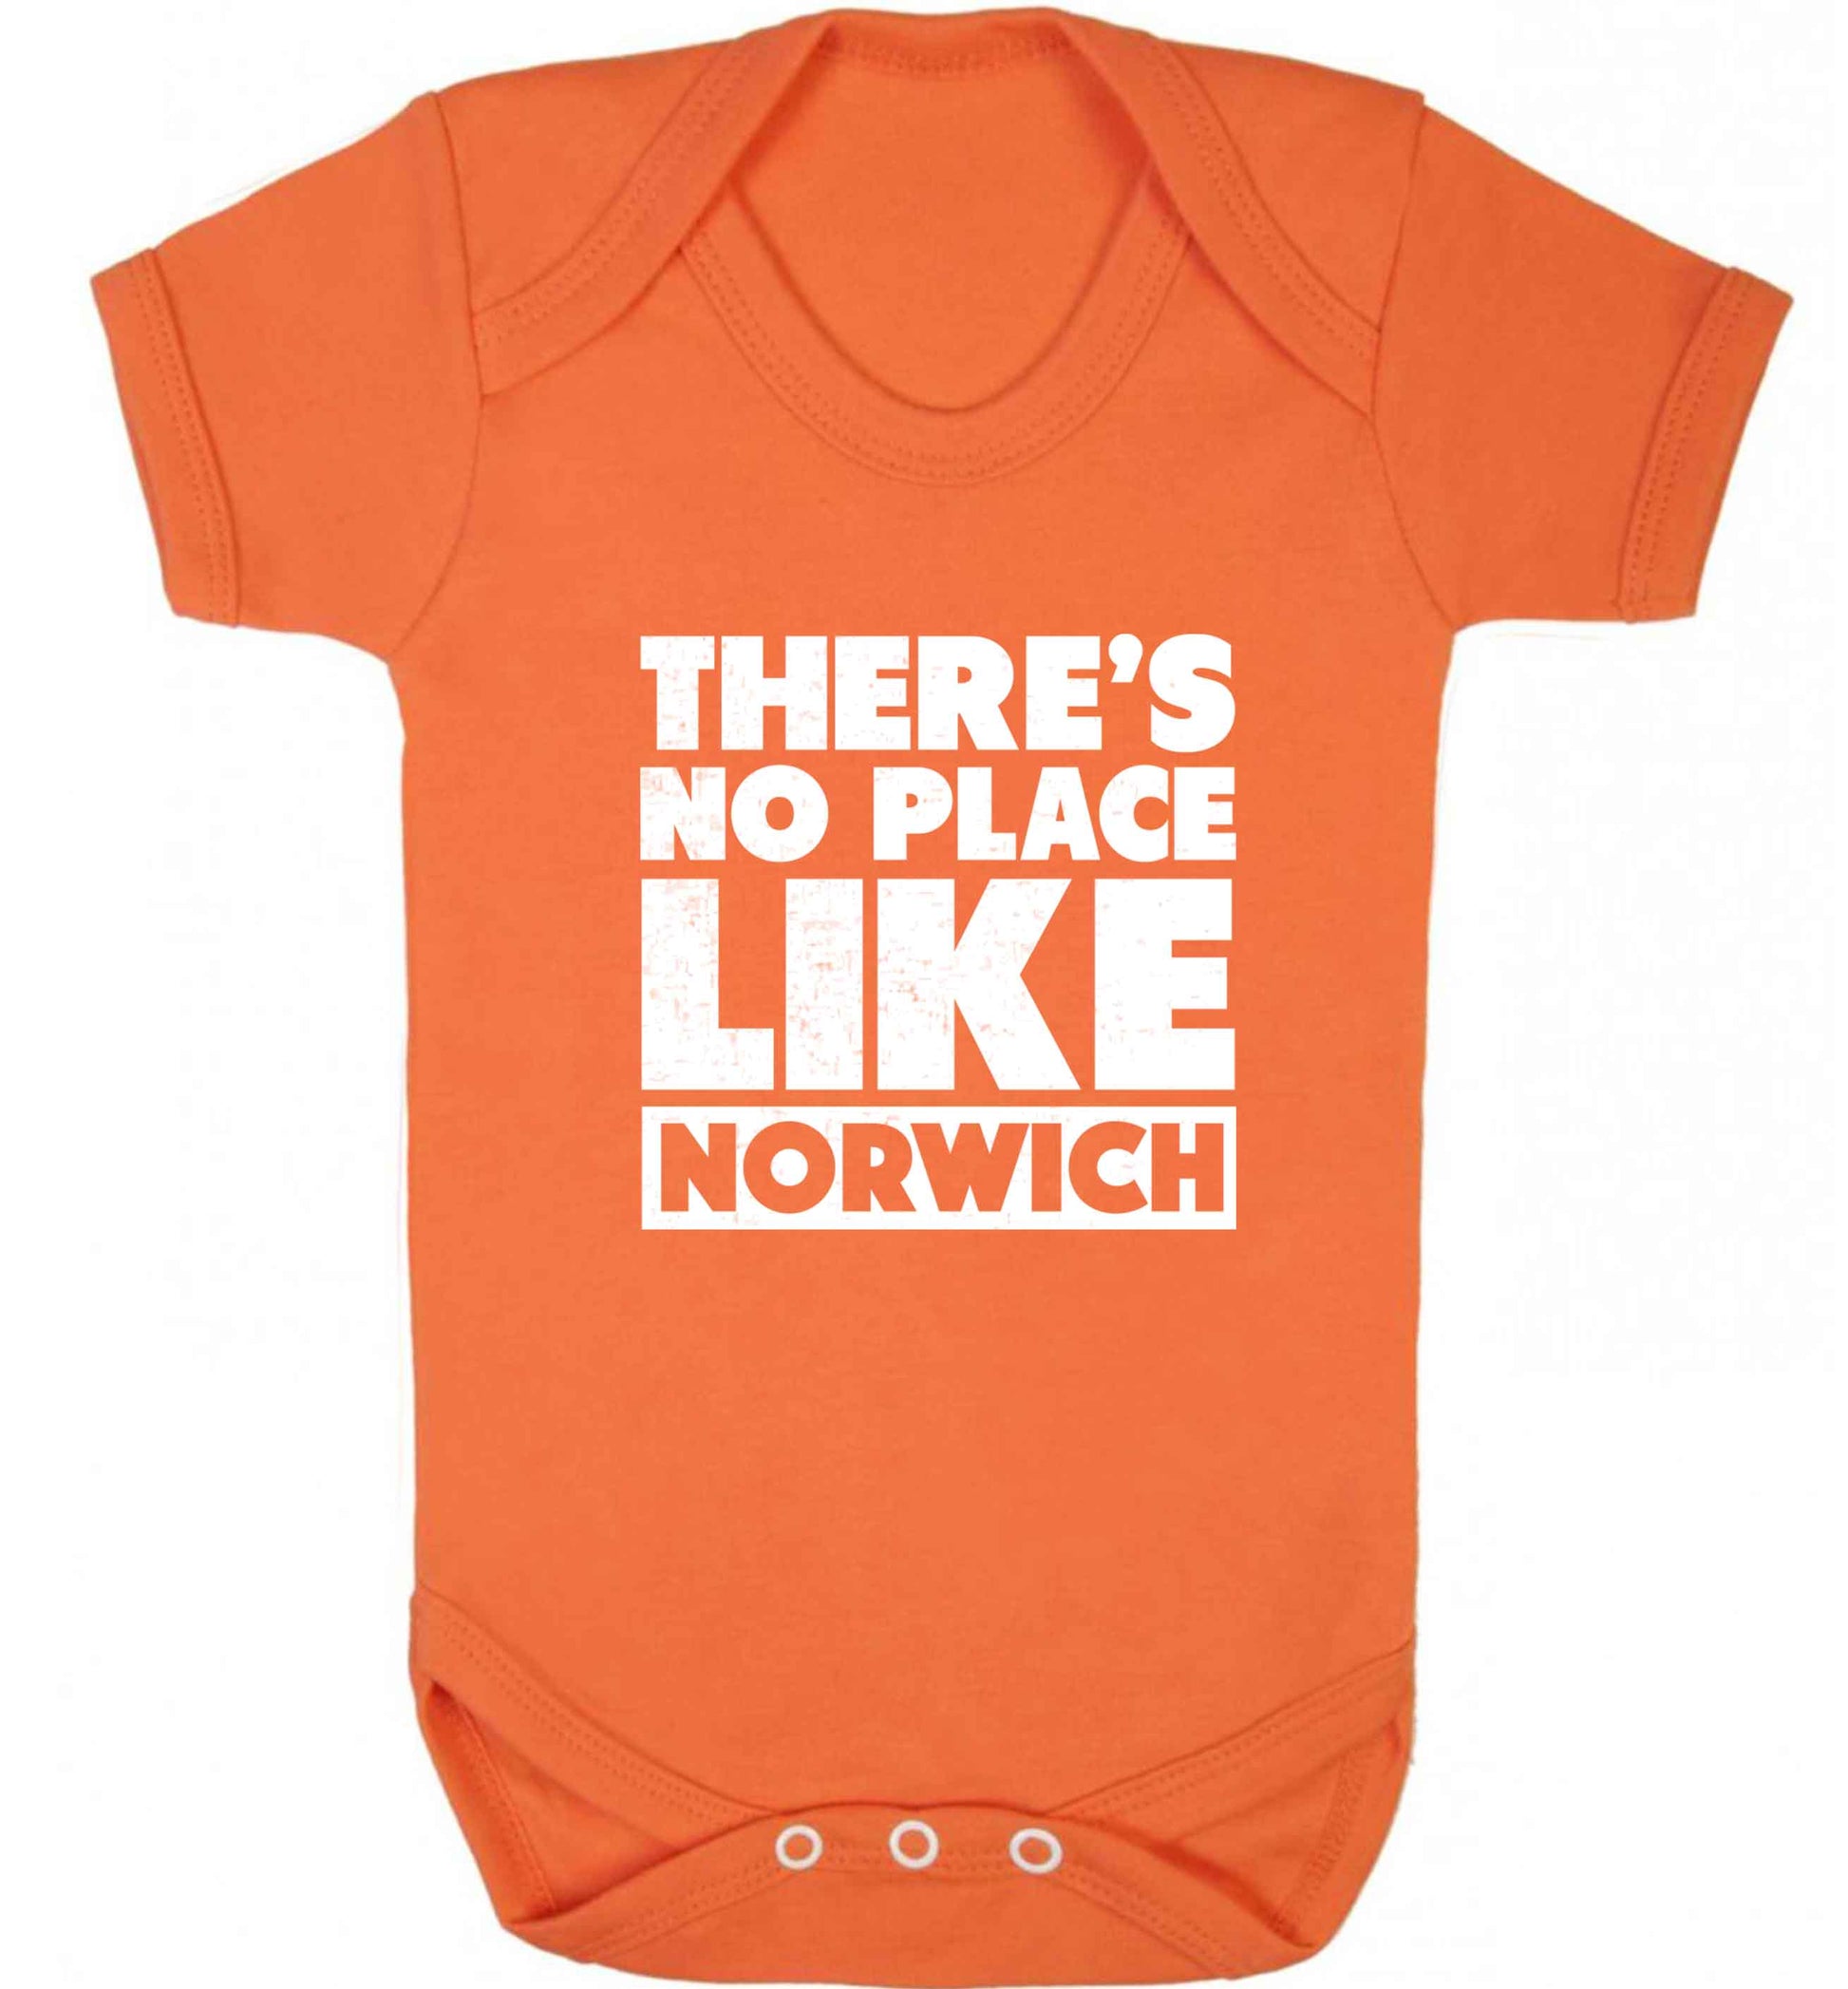 There's no place like Norwich baby vest orange 18-24 months